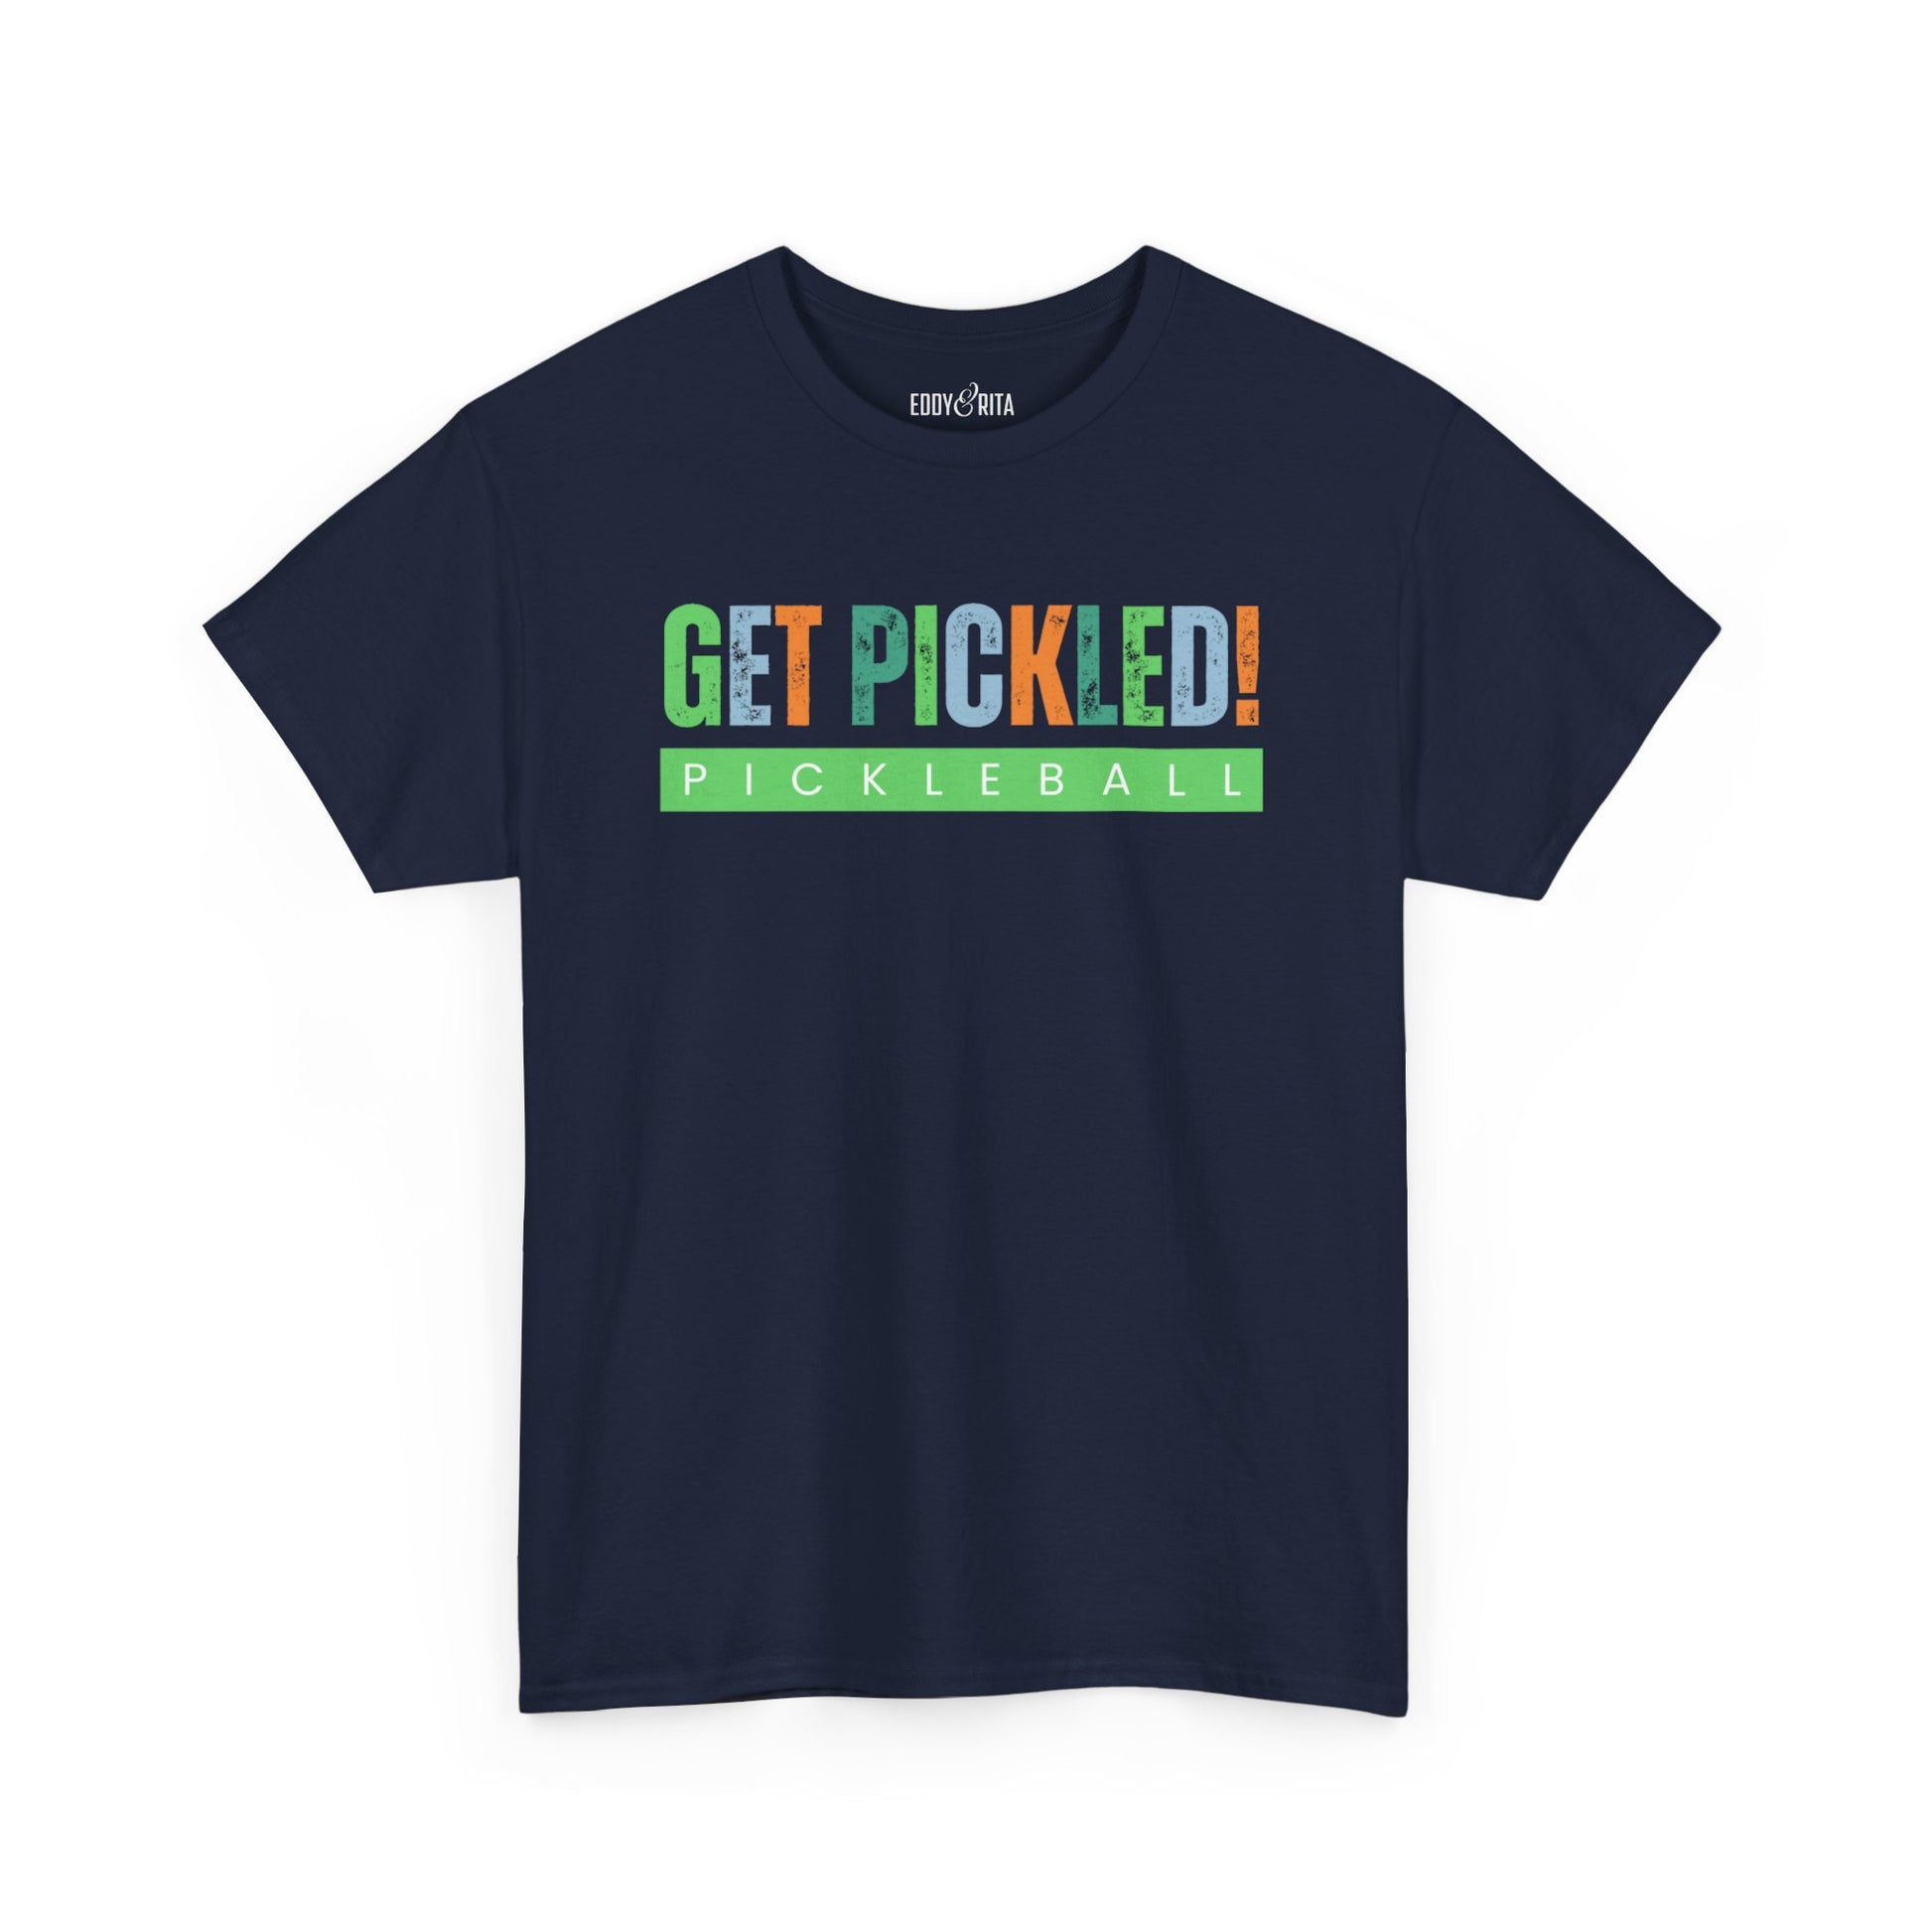 Eddy and Rita Men's Heavy Cotton T-Shirt - "Get Pickled! Pickleball" Graphic Tee for Pickleball Enthusiasts